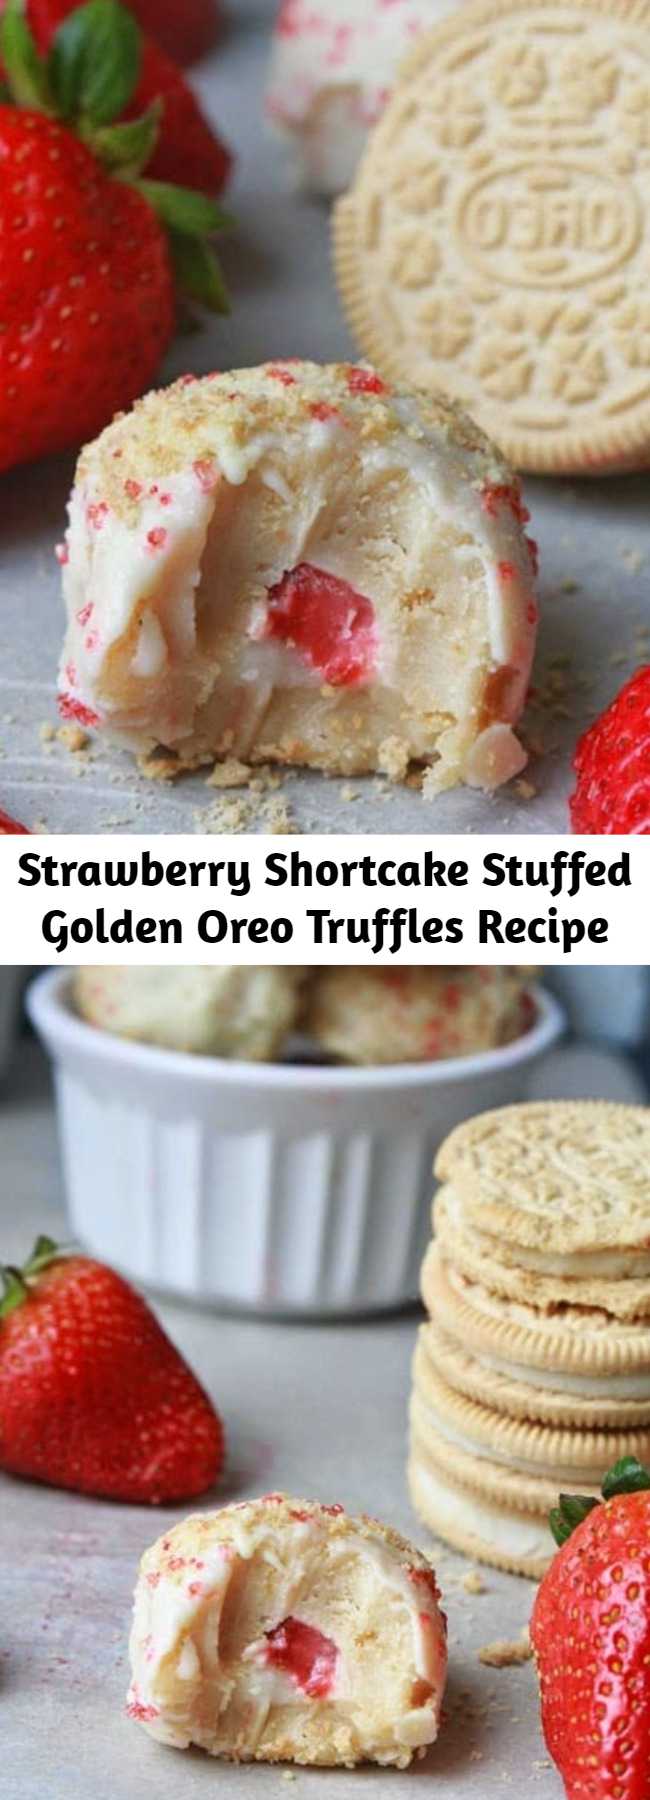 Strawberry Shortcake Stuffed Golden Oreo Truffles Recipe - Strawberry shortcake truffles made with Golden Oreo cookies and cream cheese. The dough balls are stuffed with fresh strawberries and whipped cream then dipped into melted white chocolate. A simple and fun way to enjoy the classic strawberry shortcake.